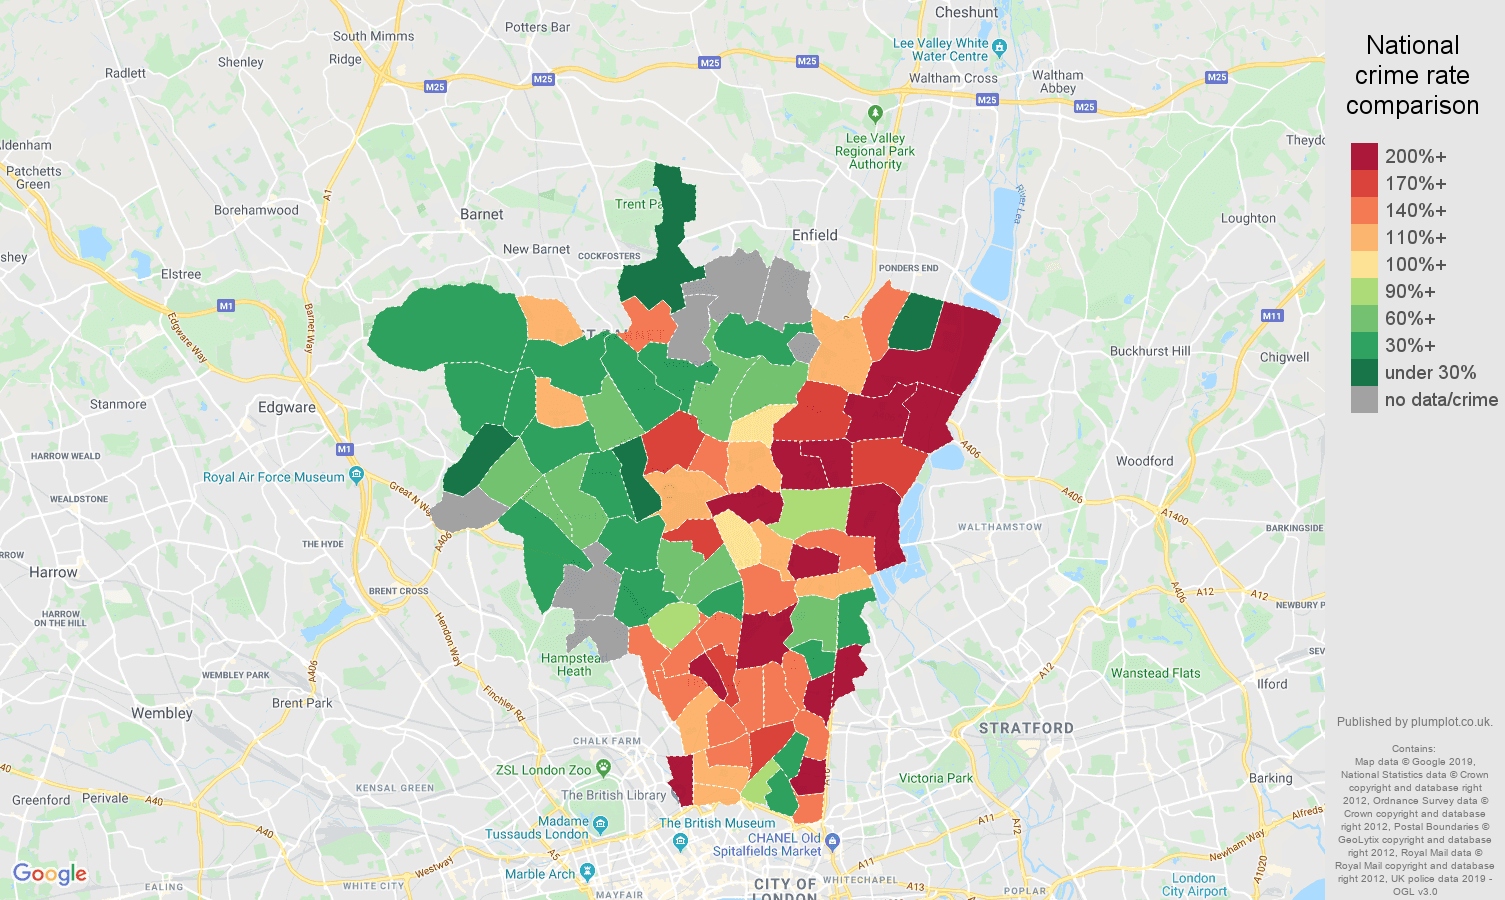 North London possession of weapons crime rate comparison map